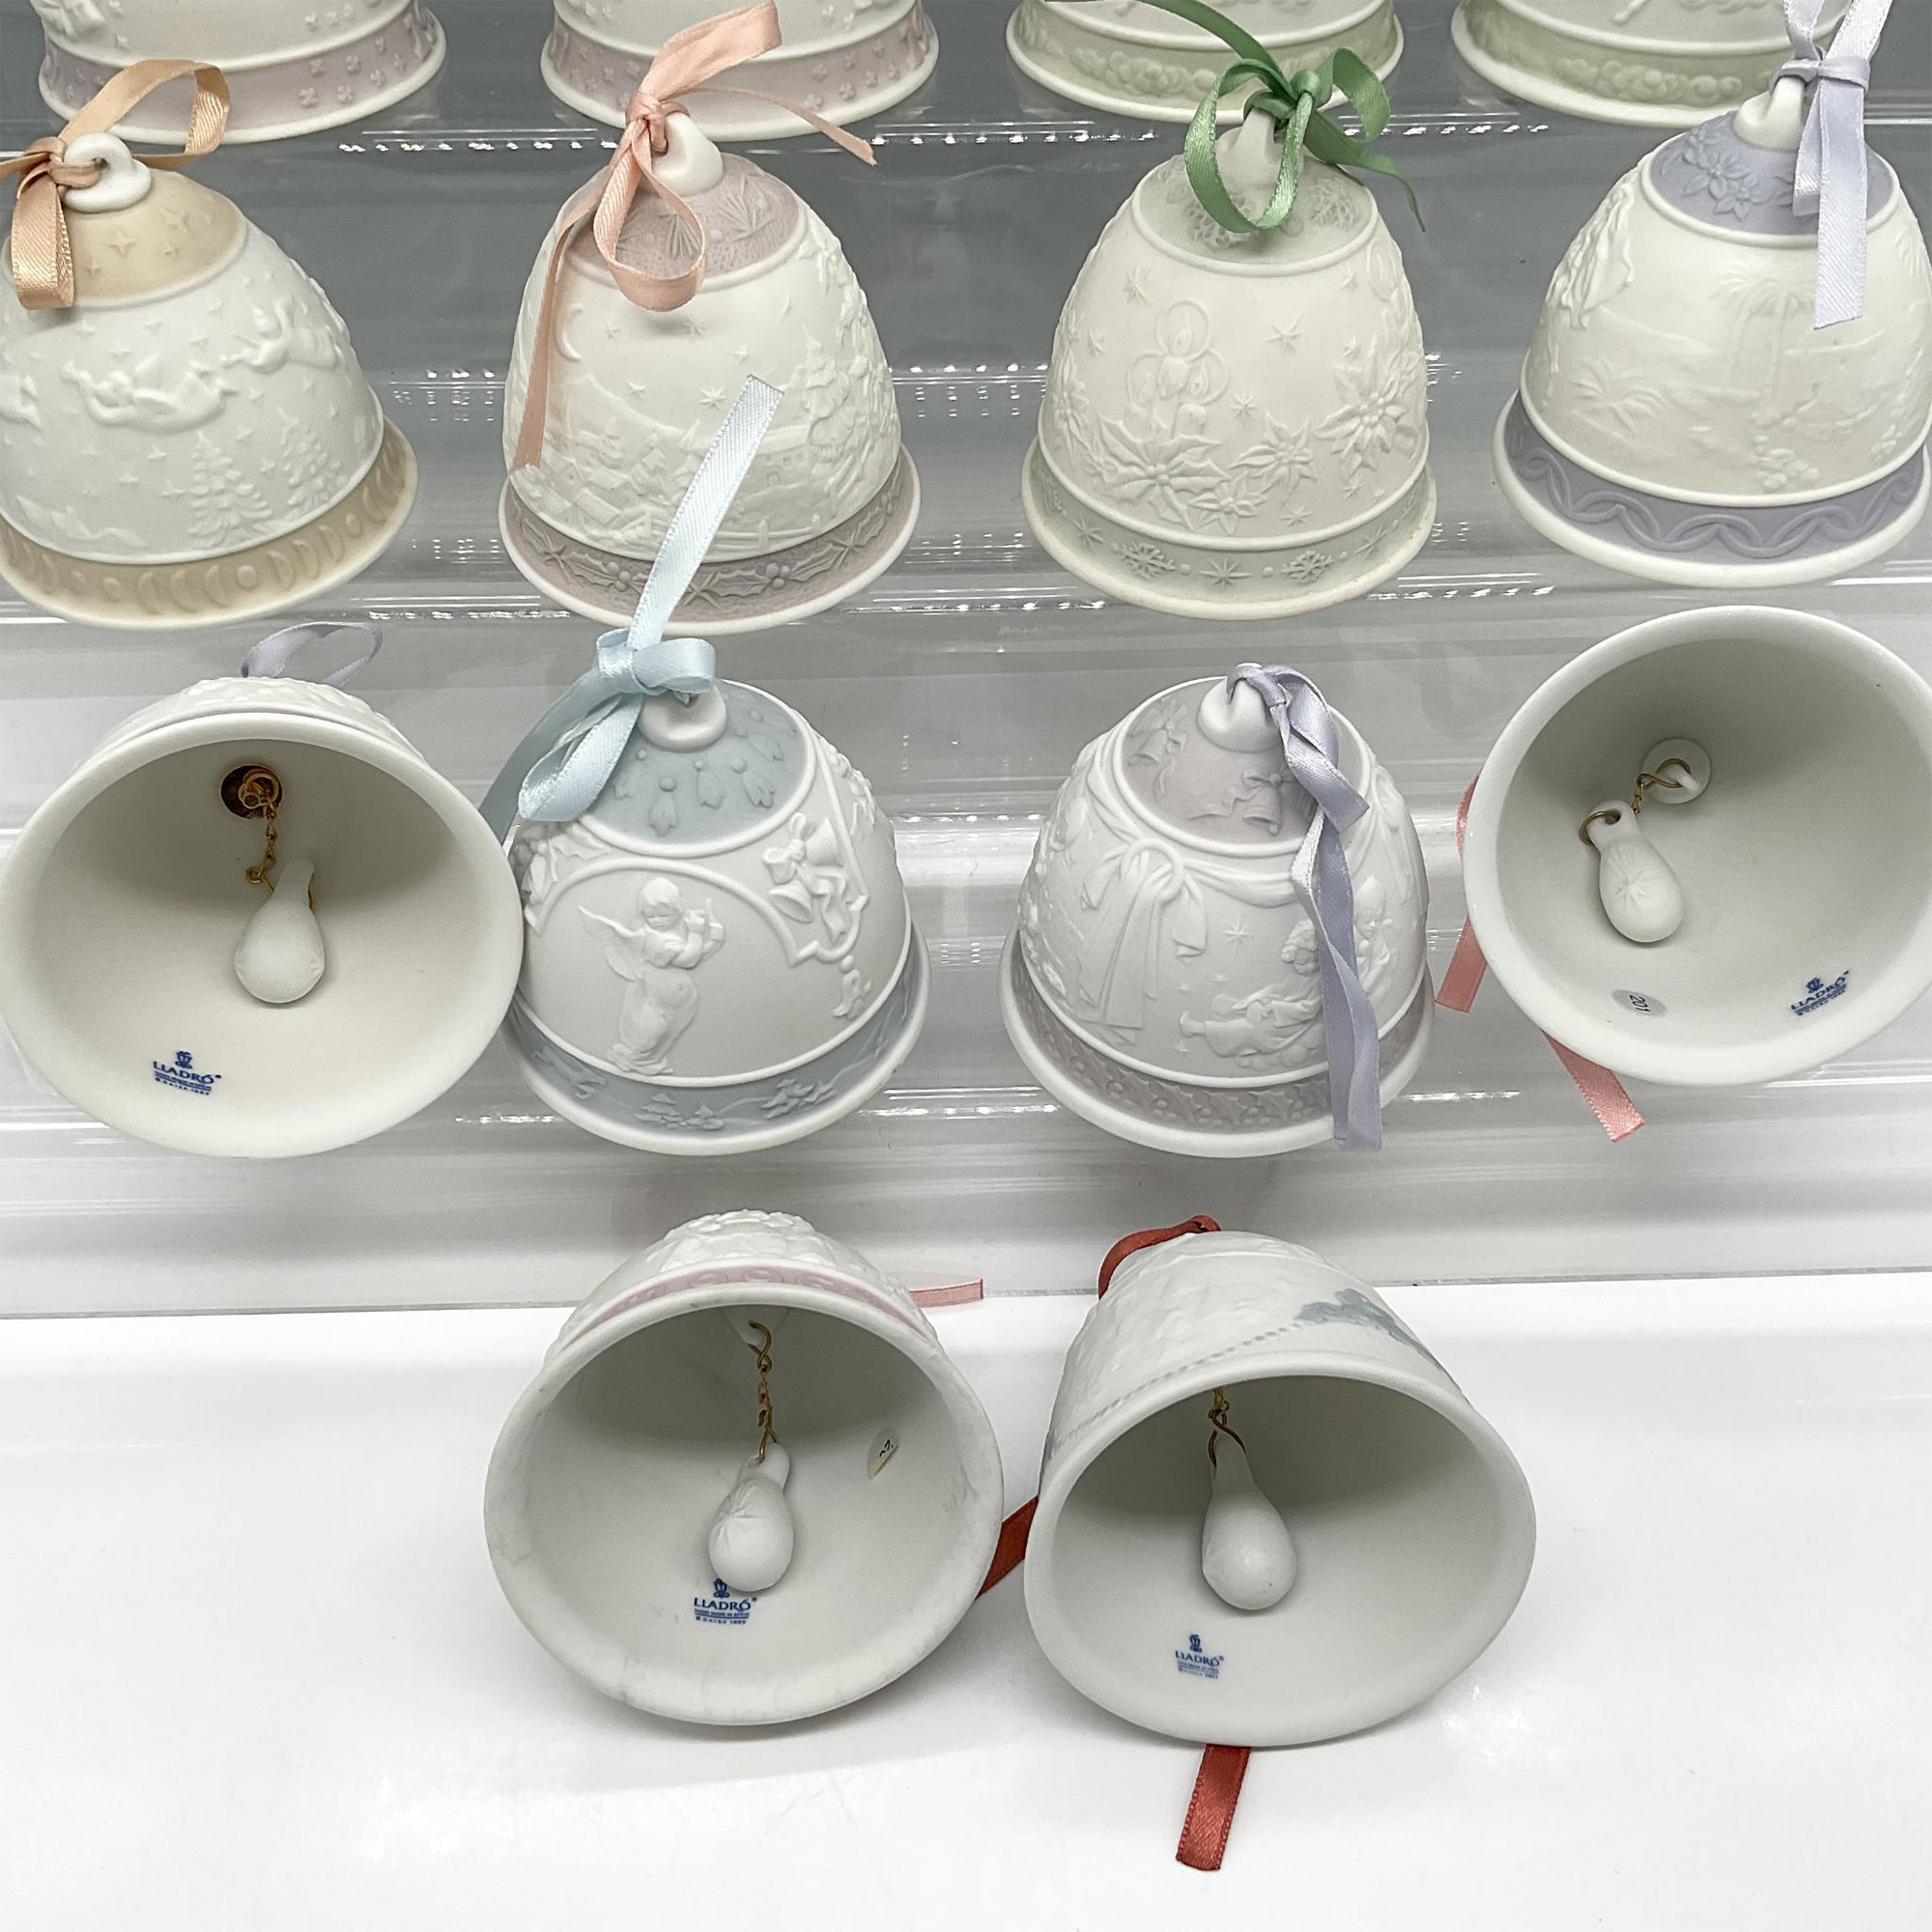 14pc Lladro Porcelain Annual Holiday Bell Ornaments - Image 3 of 3